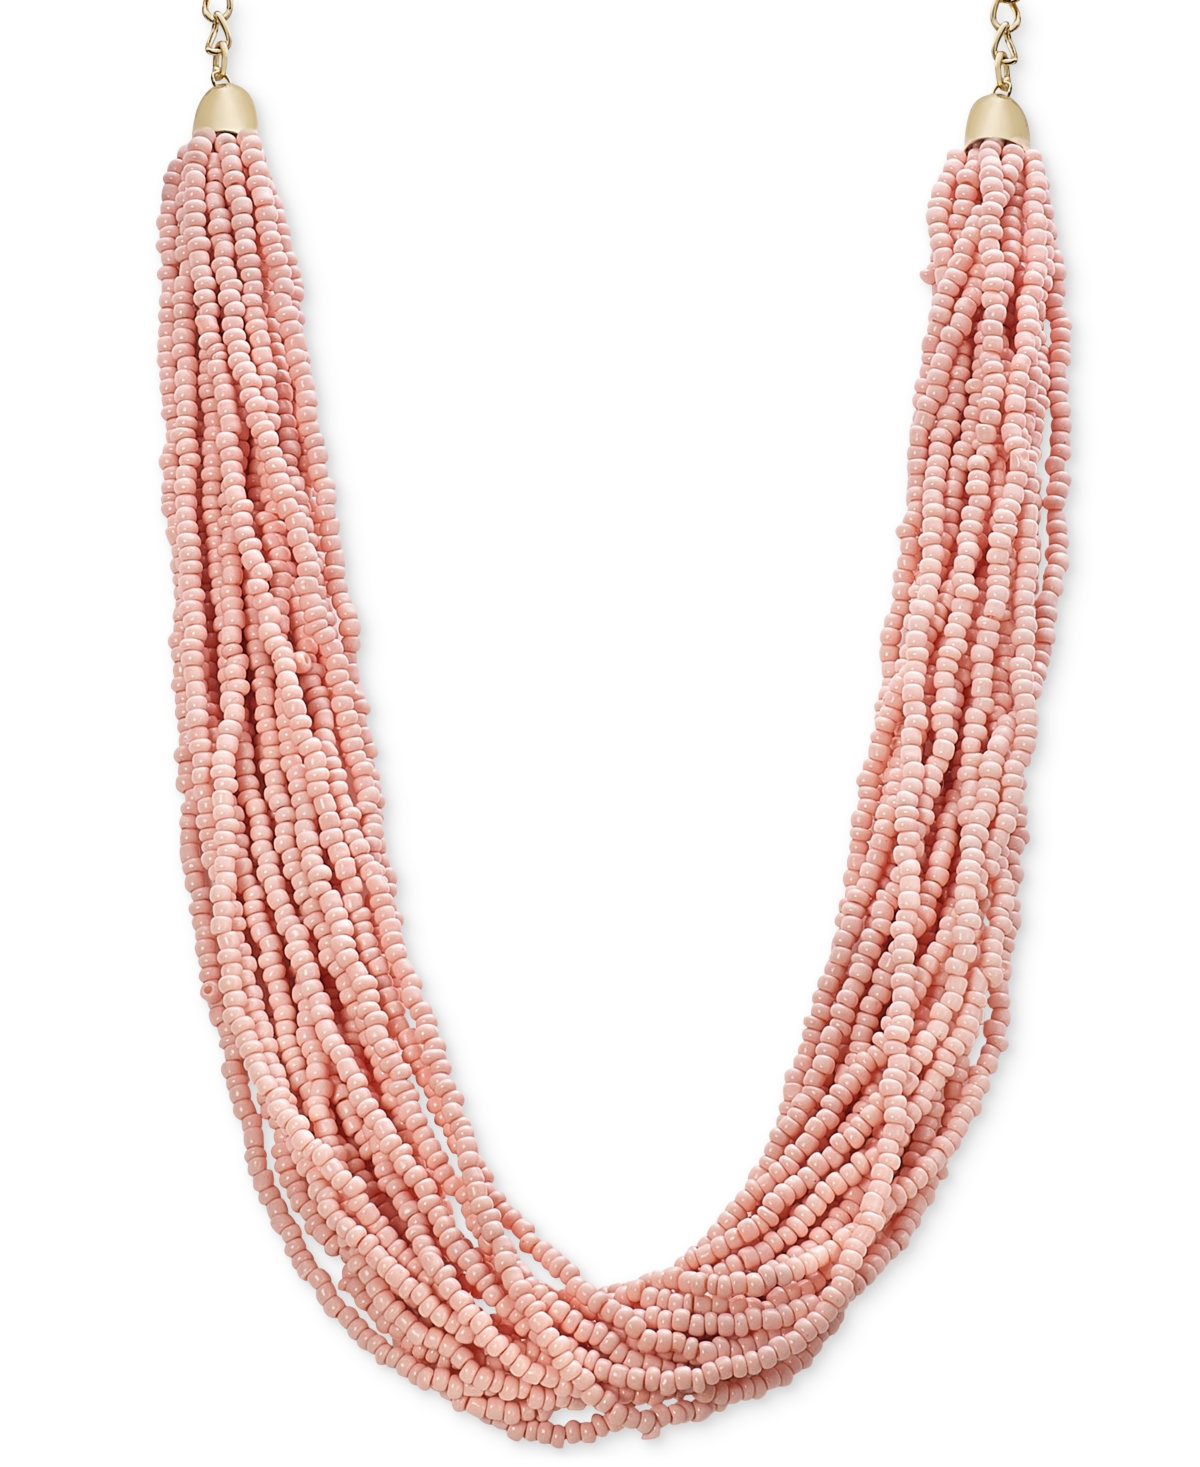 Beaded Layered Torsade Necklace, 18" + 2" extender, Created for Macy's - Pink